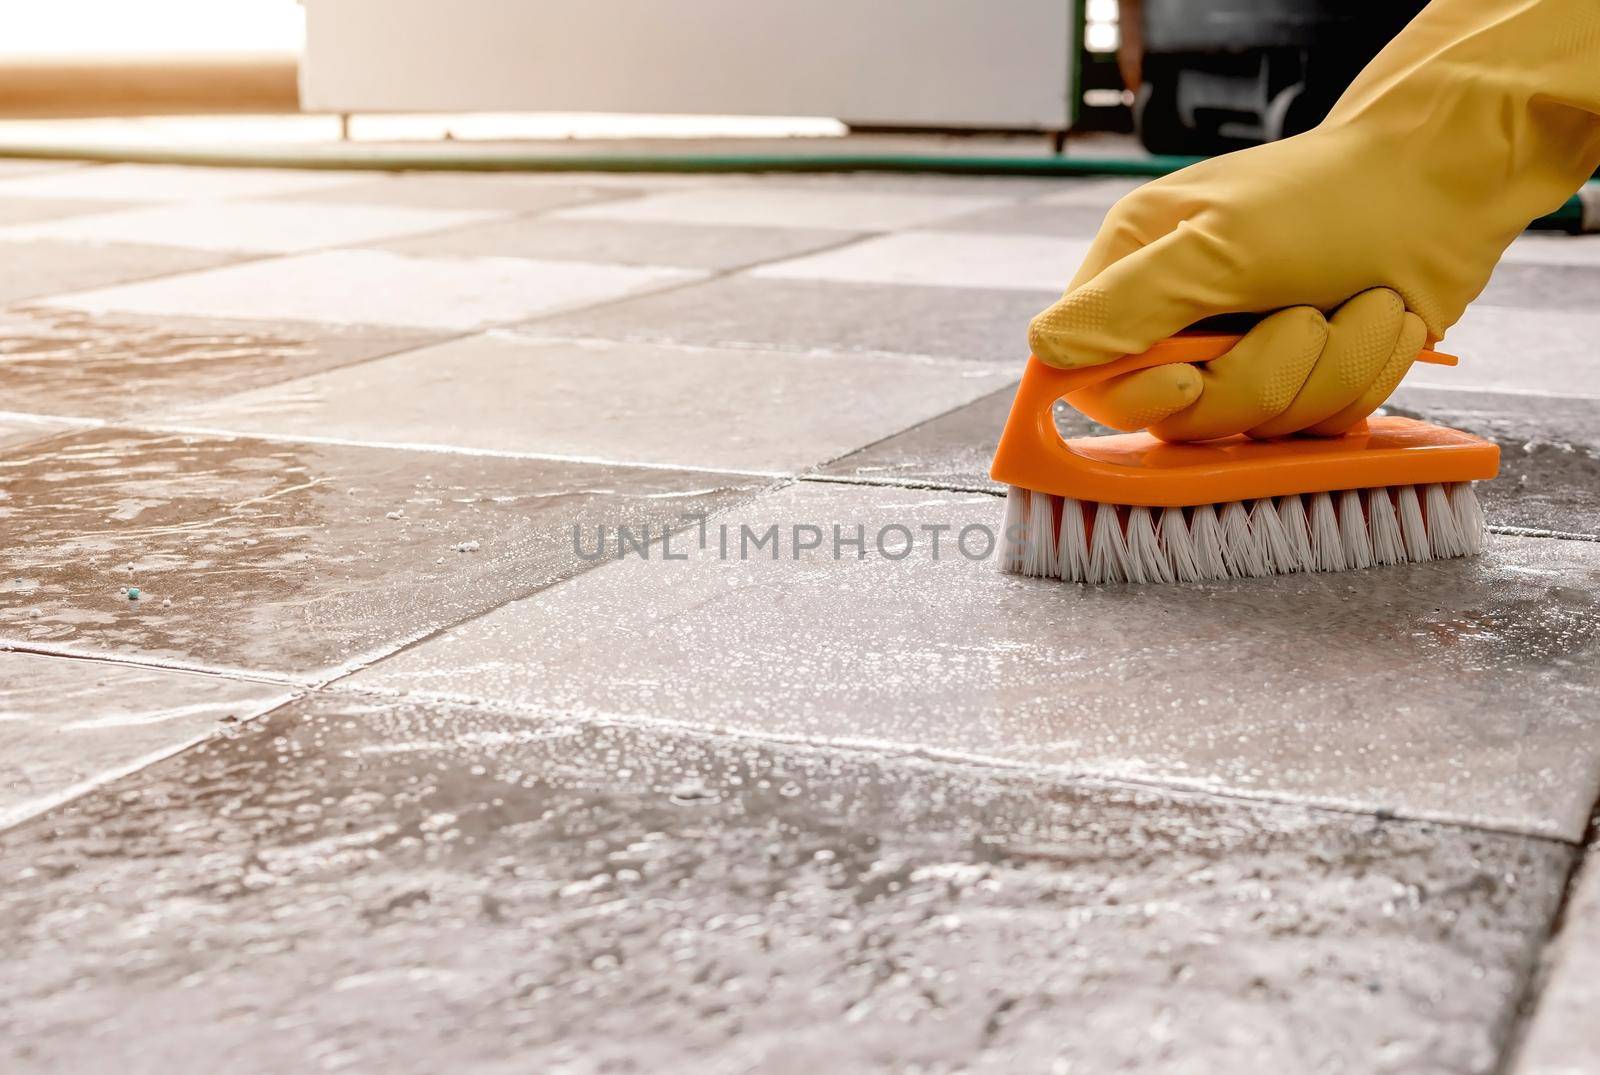 Hands wearing yellow rubber gloves are using a plastic floor scrubber to scrub the tile floor with a floor cleaner.